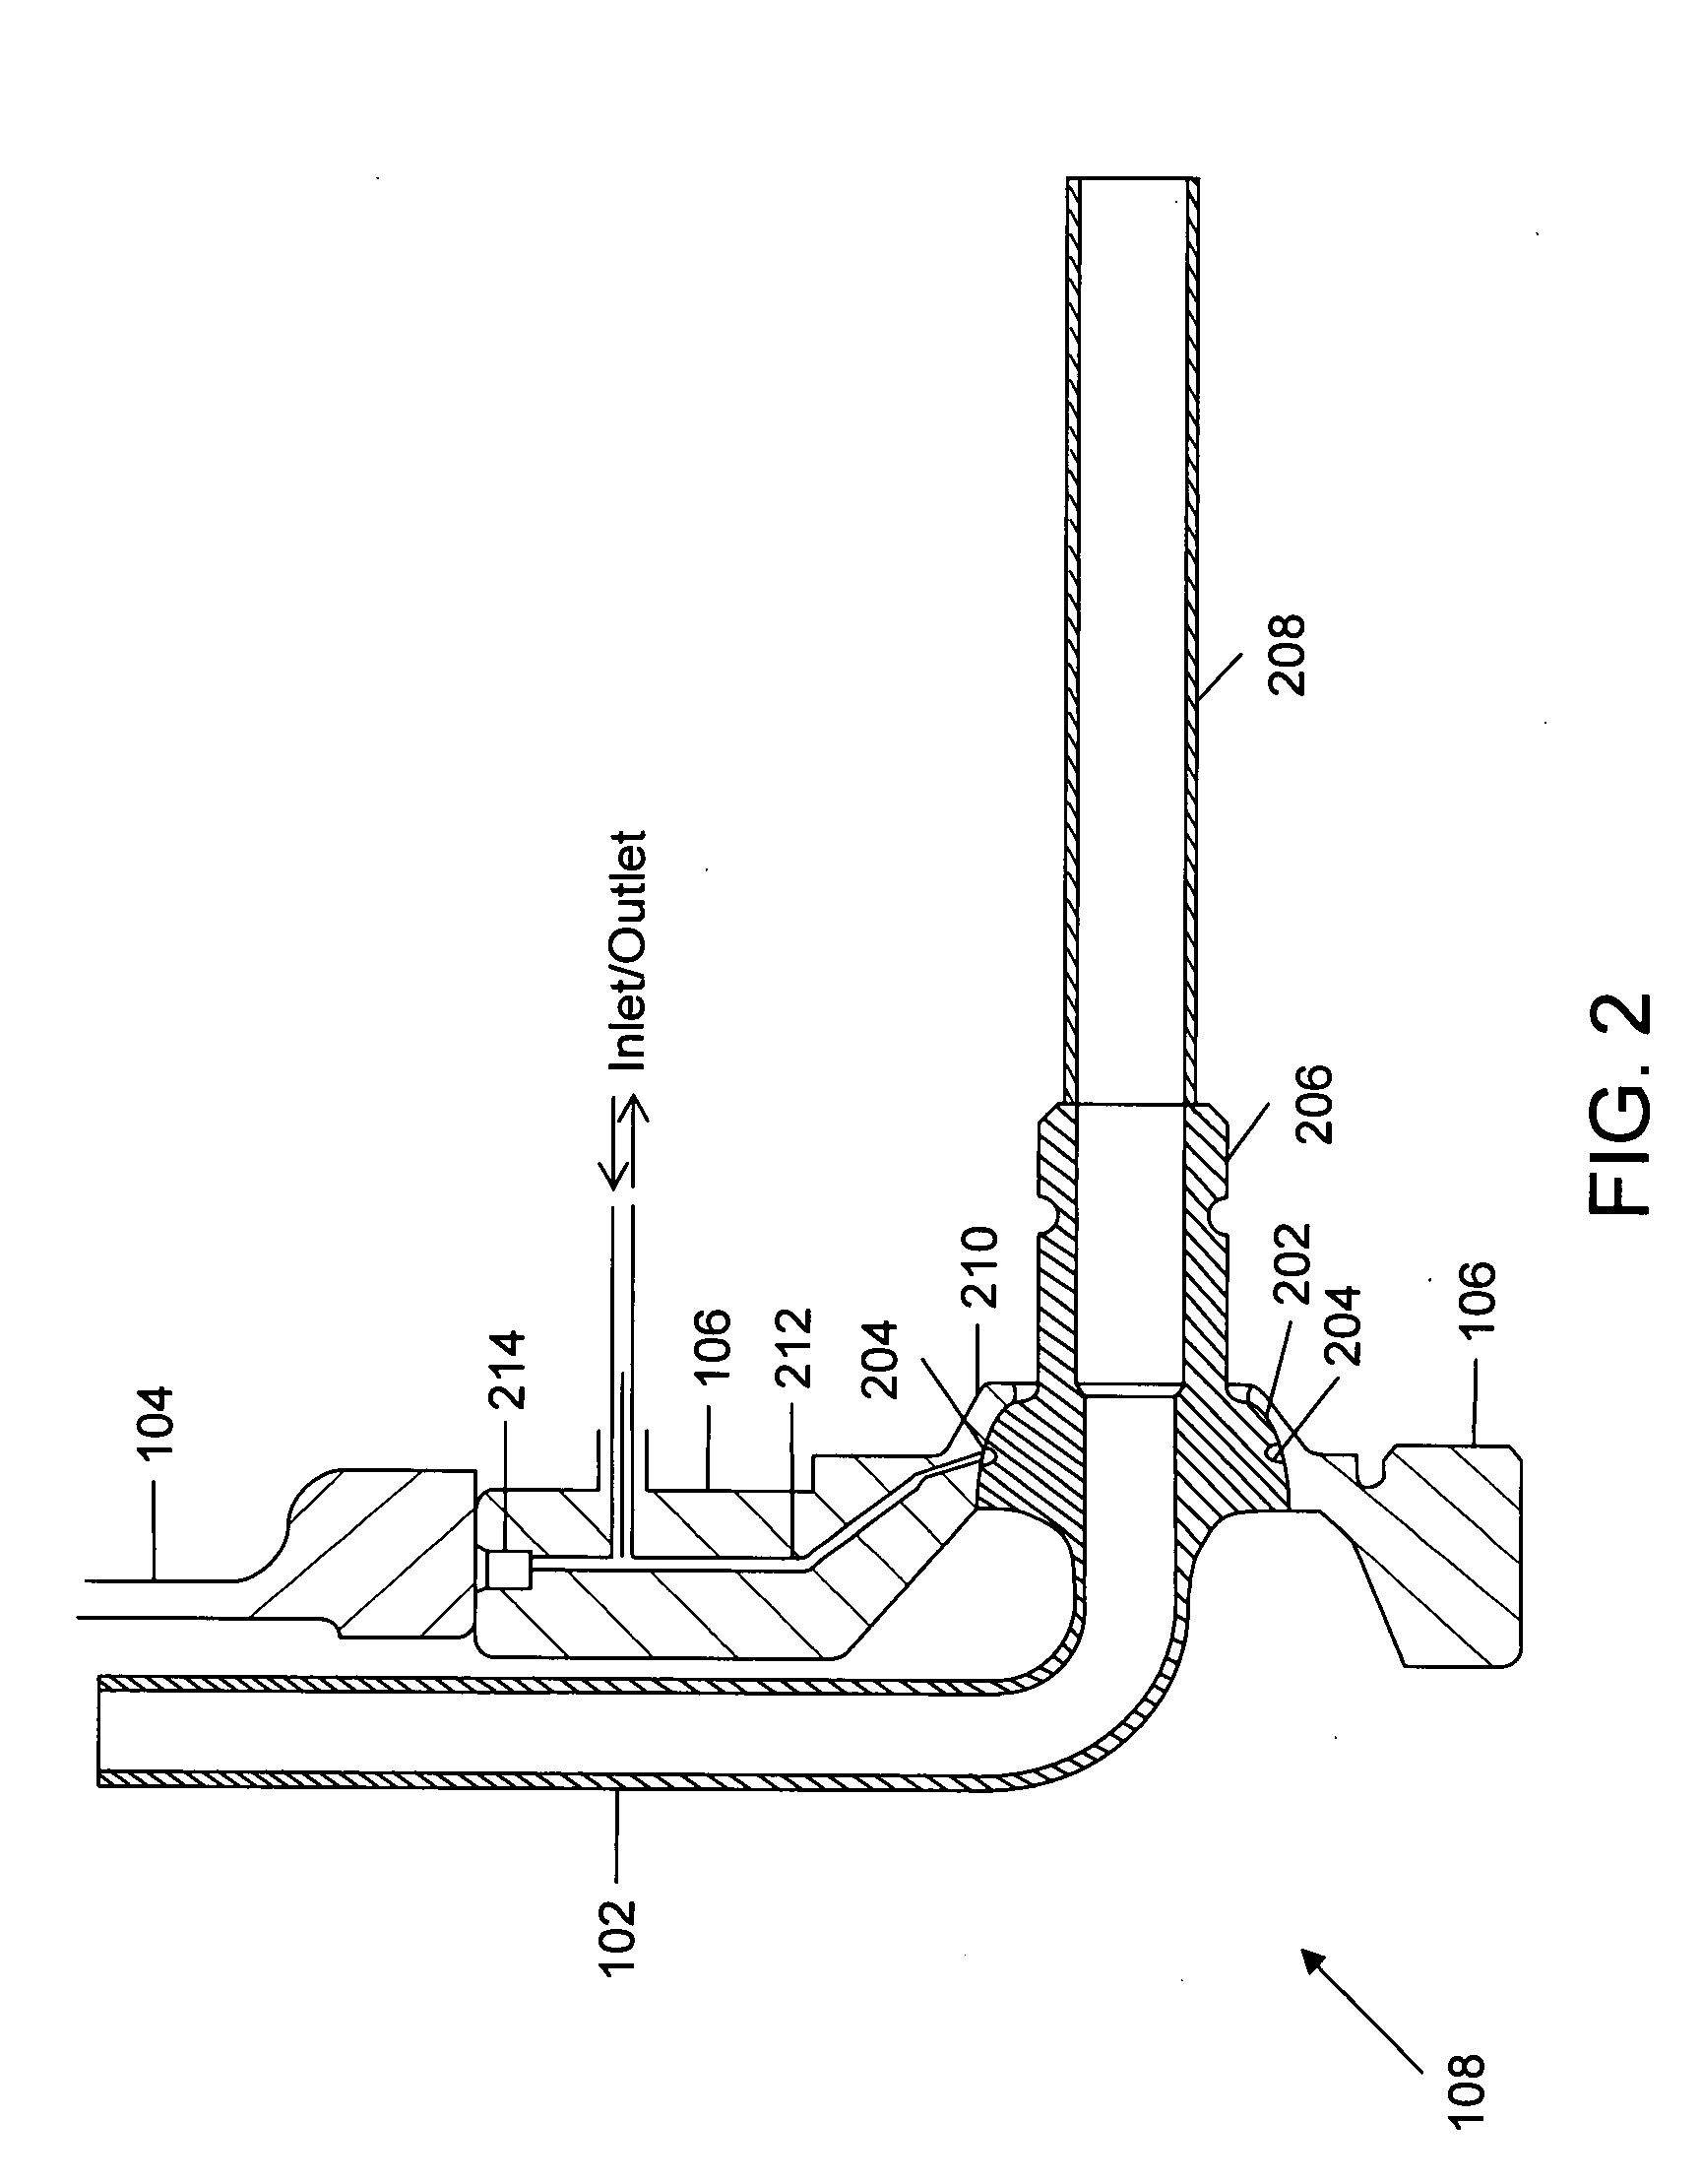 Joint for connecting two tubes in a high-temperature environment